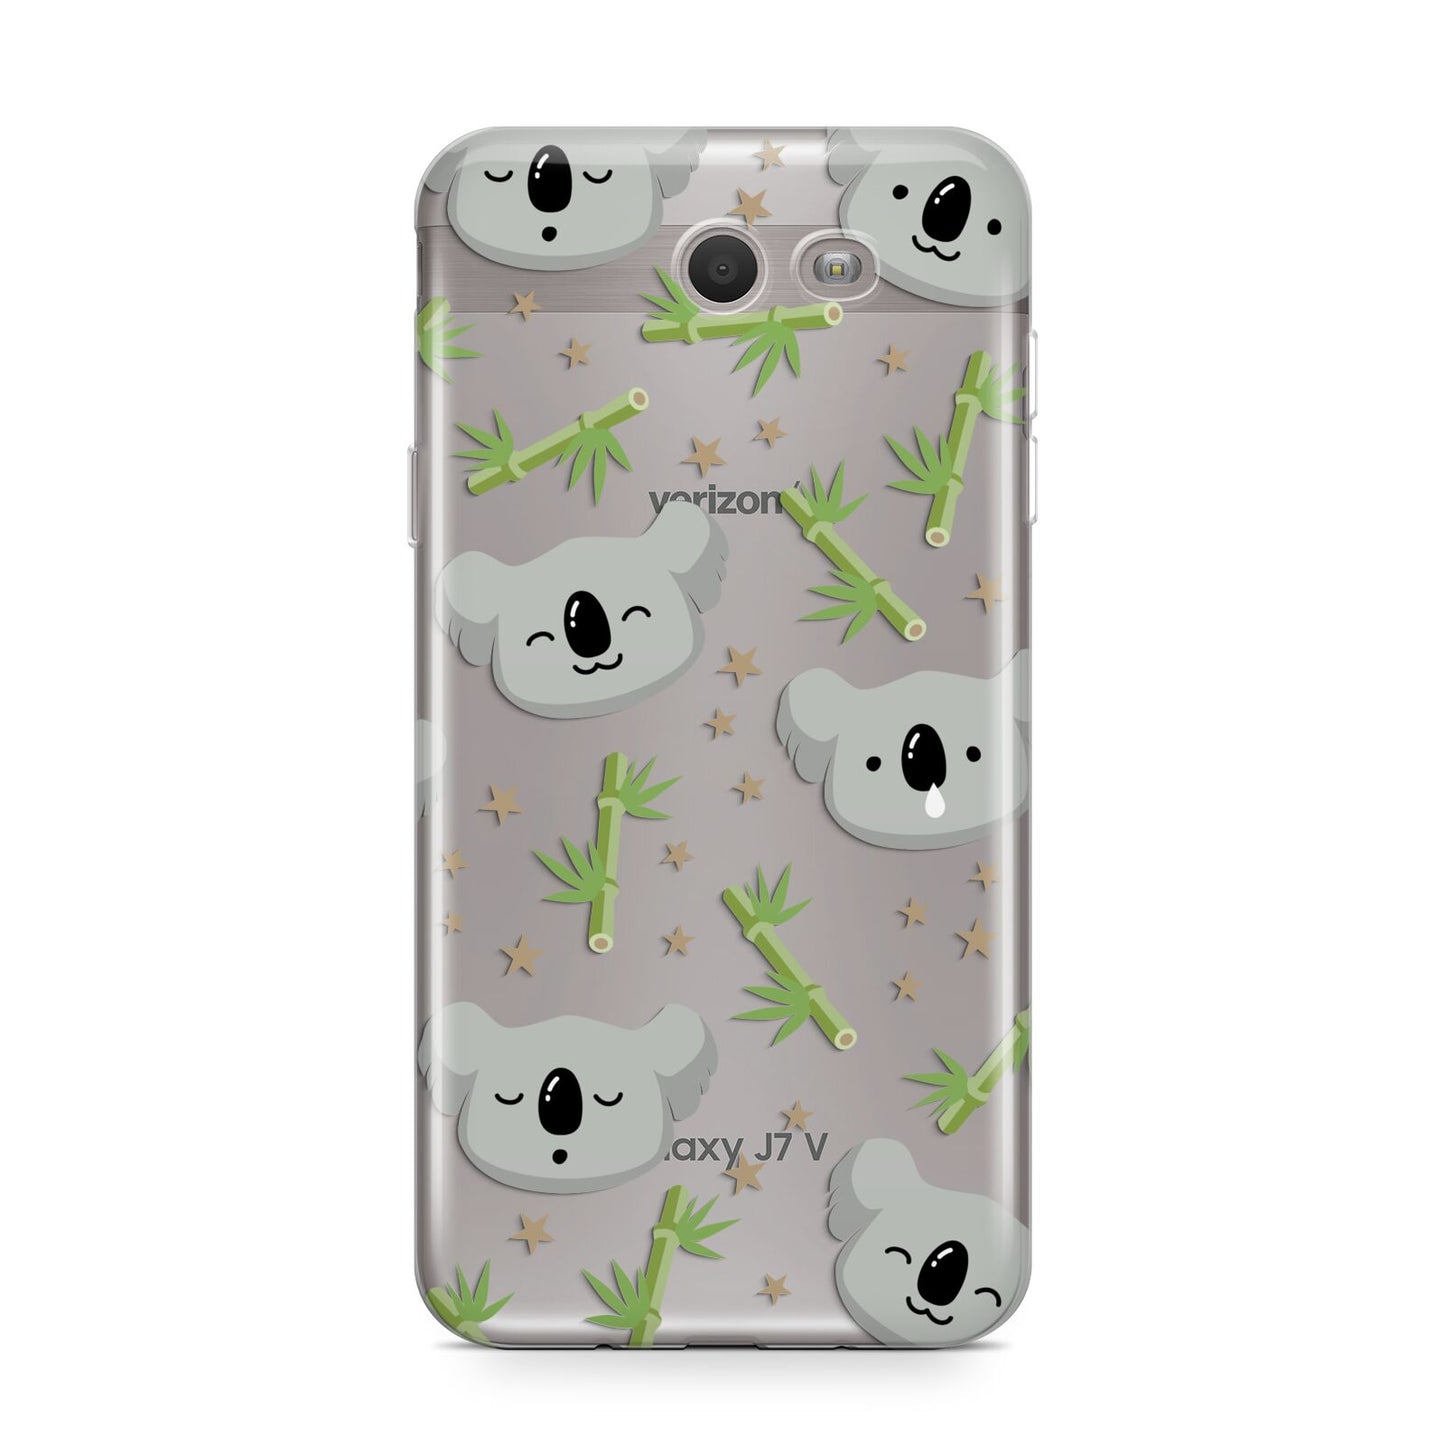 Koala Faces with Transparent Background Samsung Galaxy J7 2017 Case